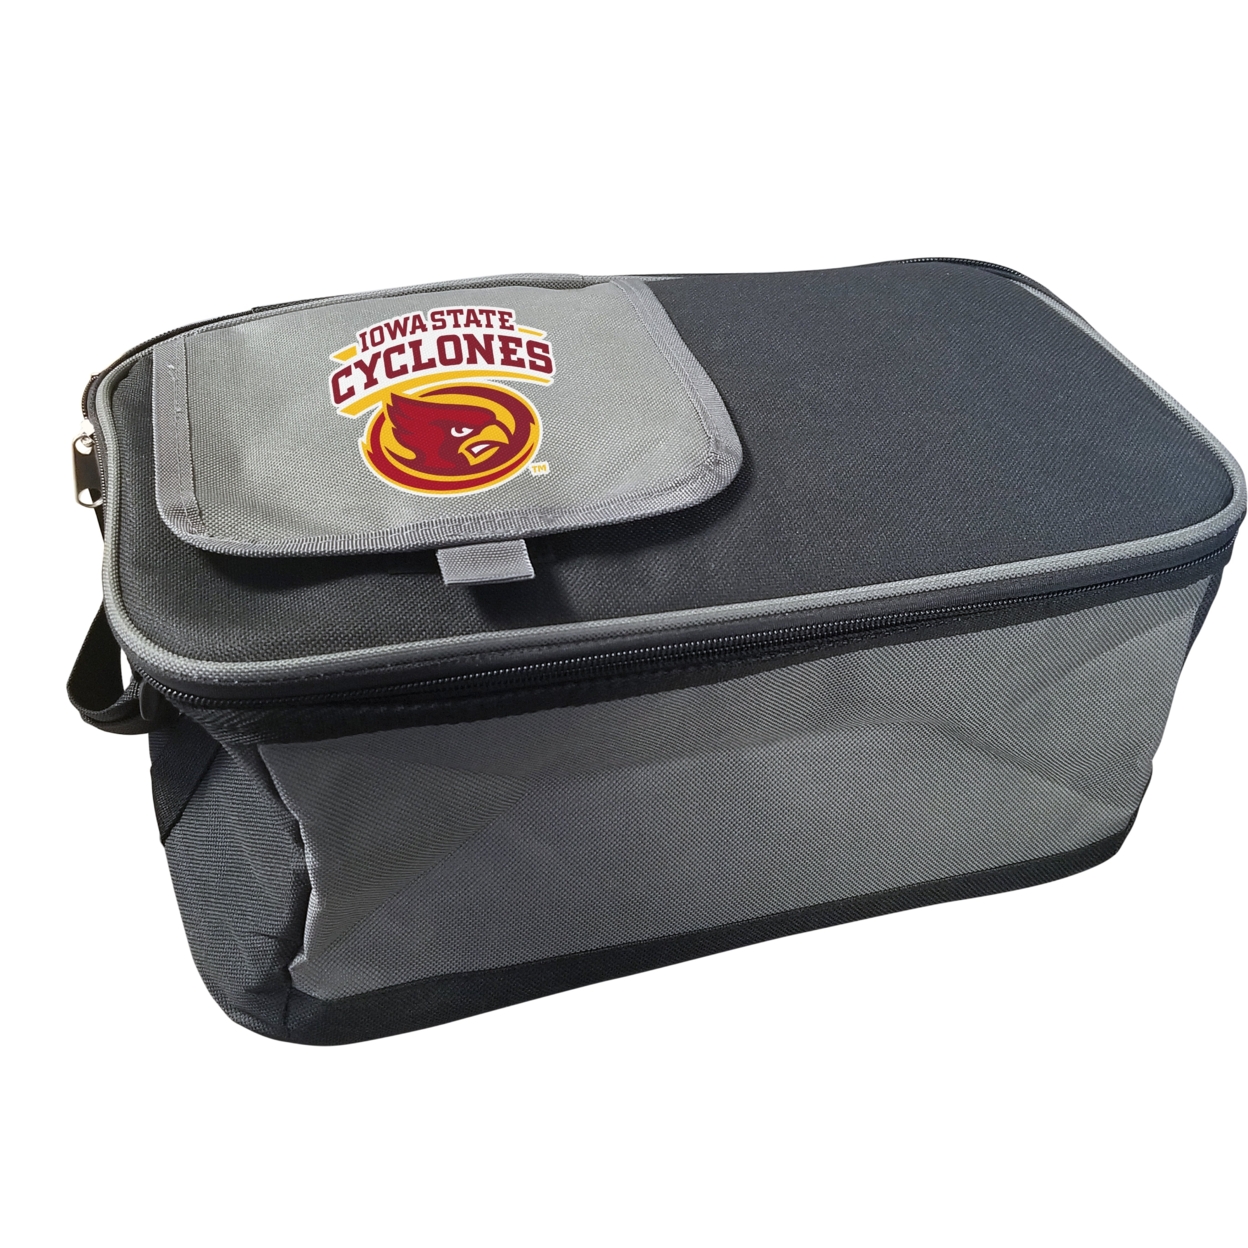 Iowa State Cyclones 9 Pack Cooler